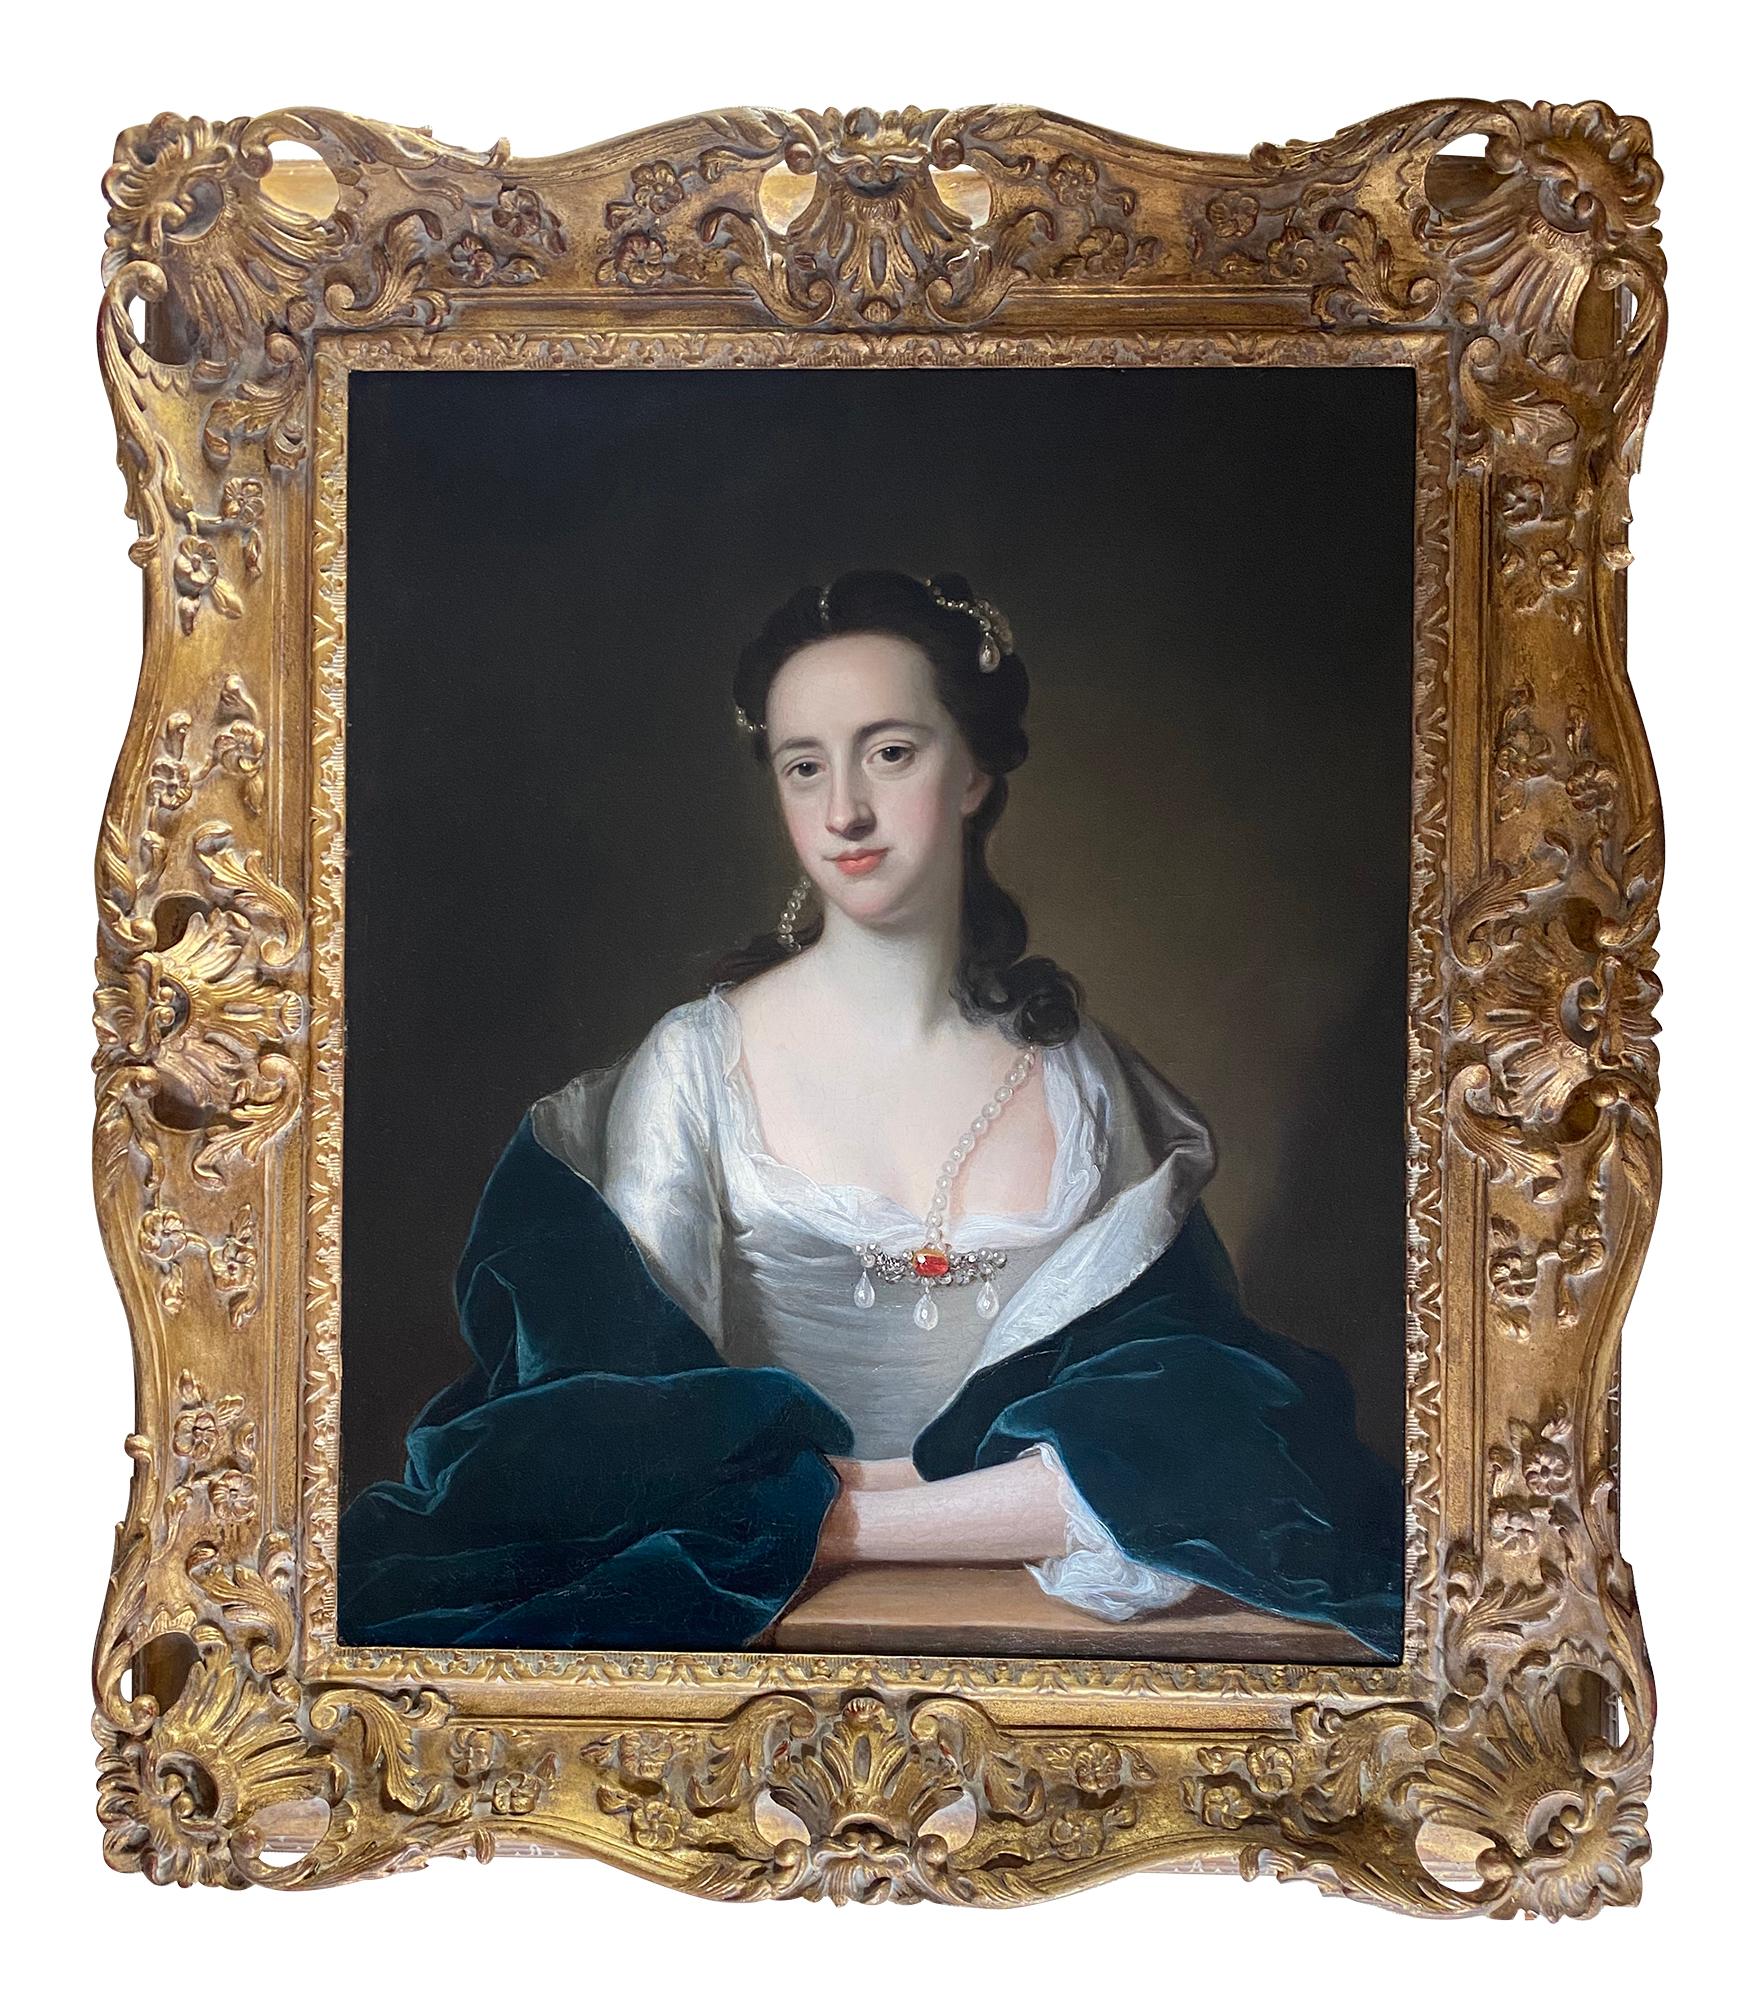 18TH CENTURY ENGLISH PORTRAIT OF A LADY IN WHITE DRESS AND BLUE CLOAK  - Painting by Thomas Hudson